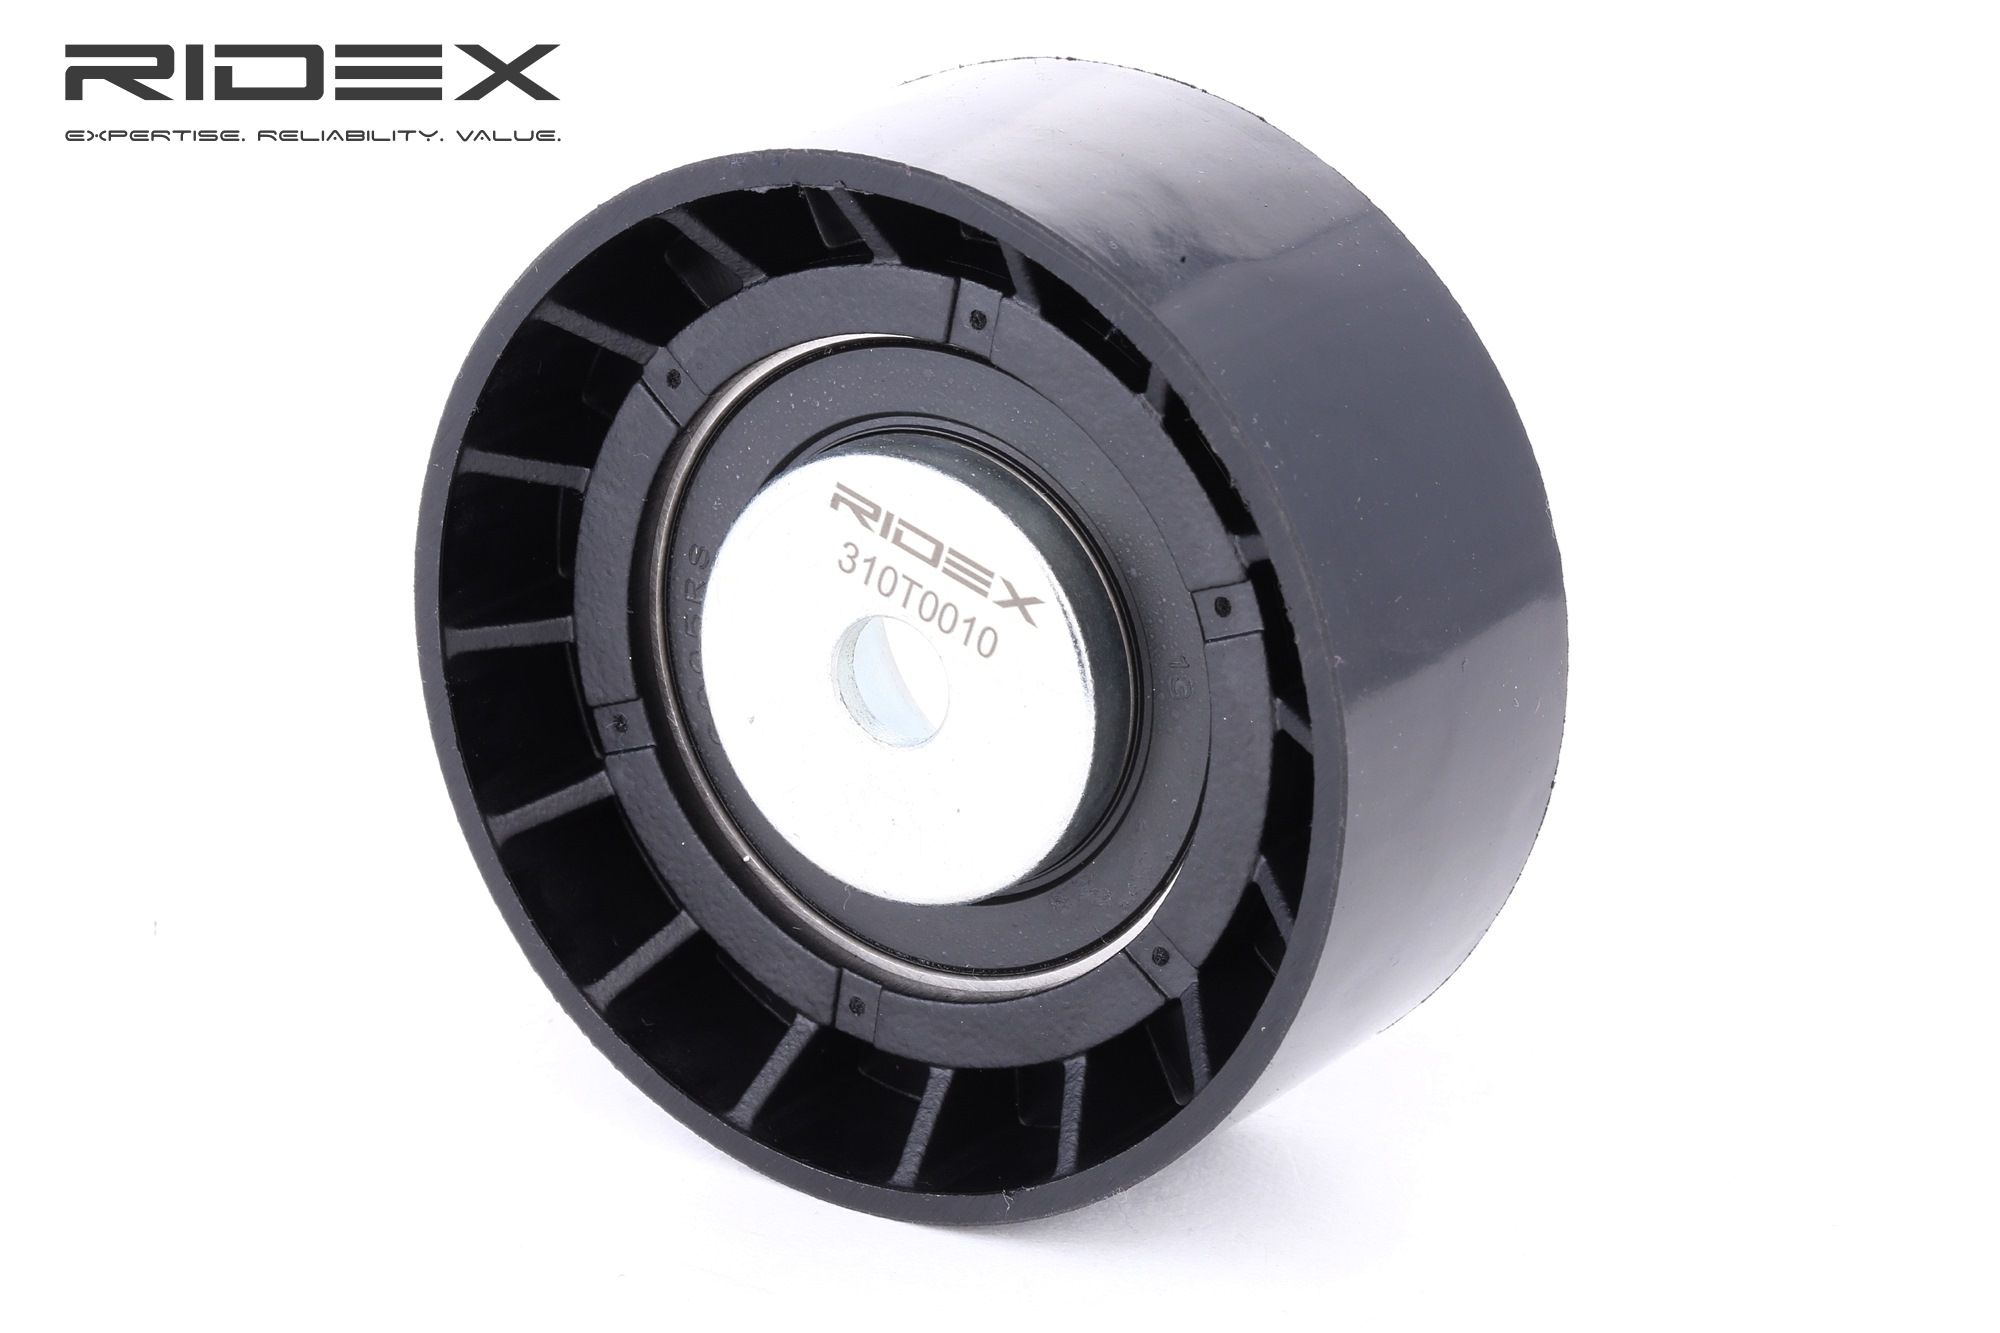 Original 310T0010 RIDEX Tensioner pulley, v-ribbed belt experience and price